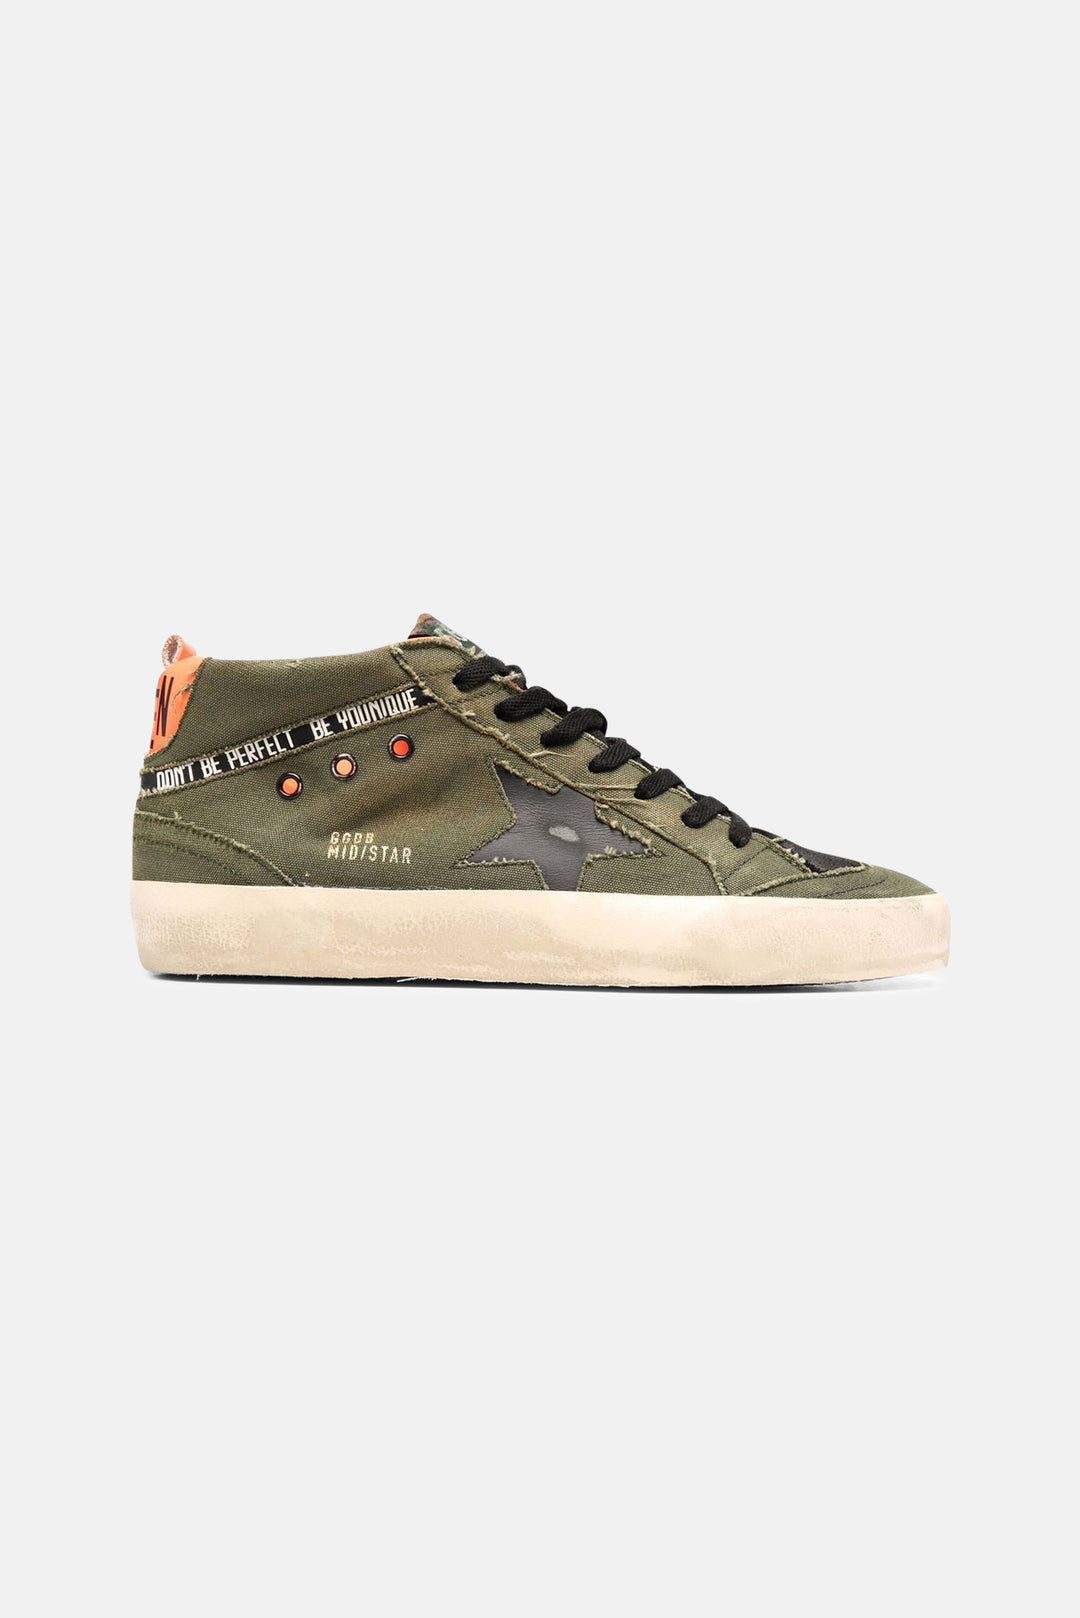 Men's Mid Star Sneakers Military Green